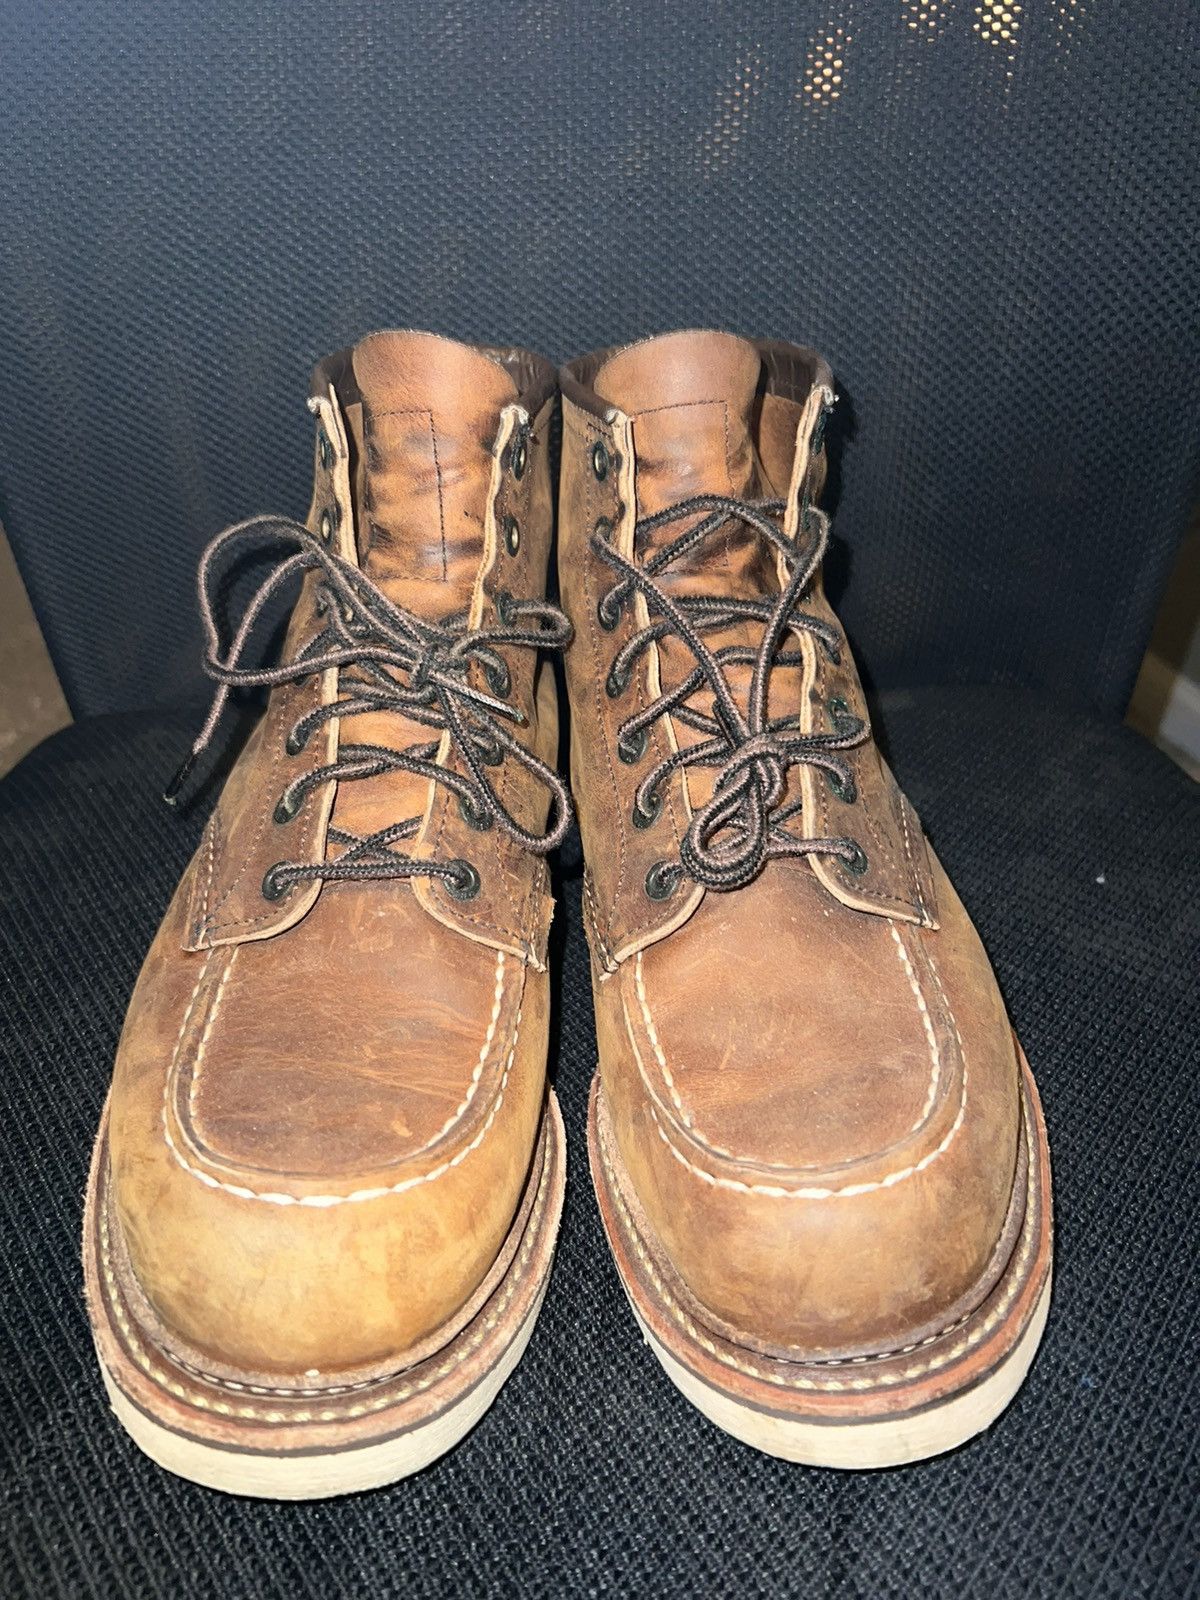 Red Wing Red Wing 1907 size 9 Size US 9 / EU 42 - 9 Thumbnail